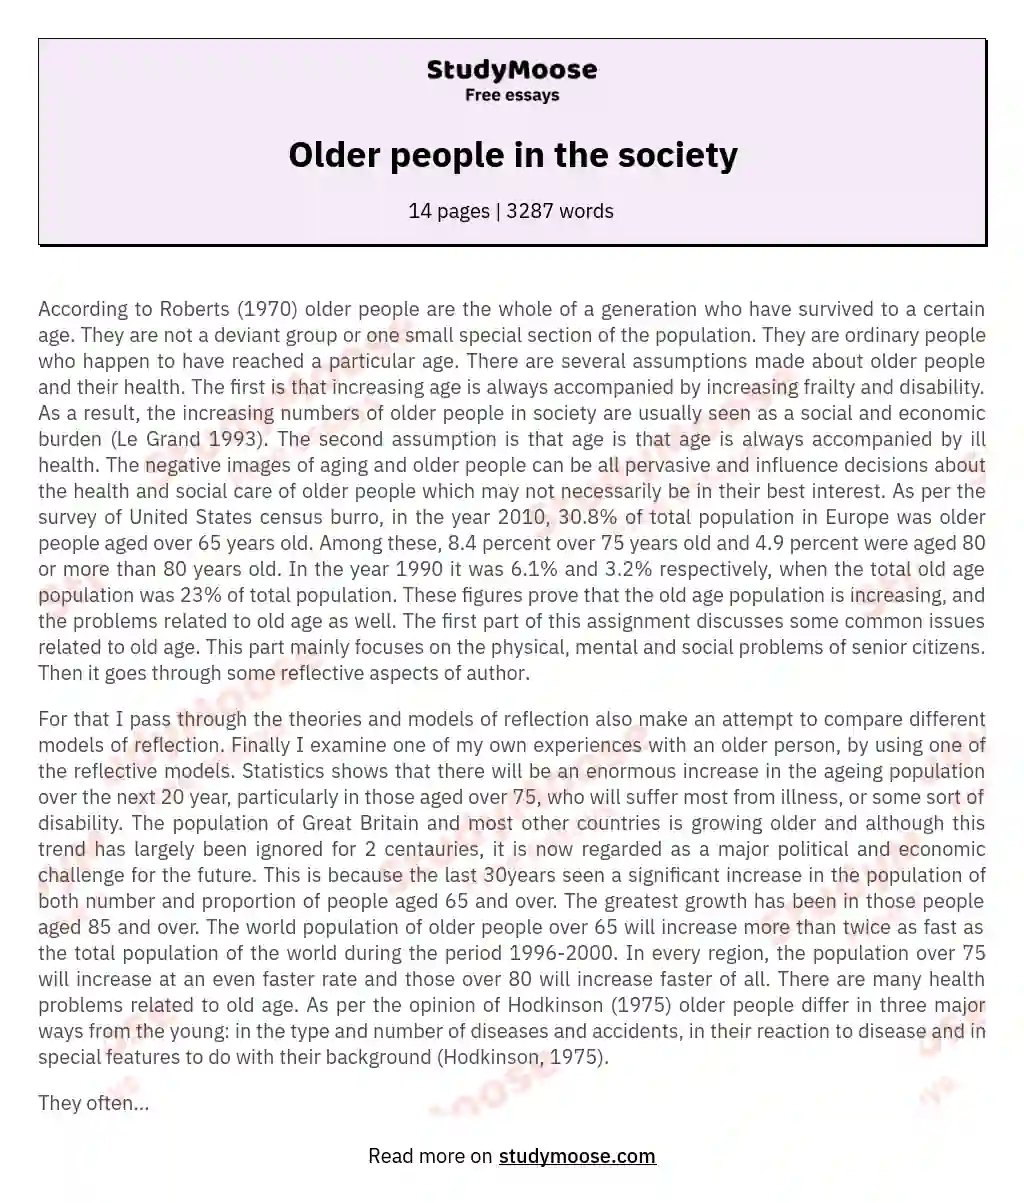 Older people in the society essay